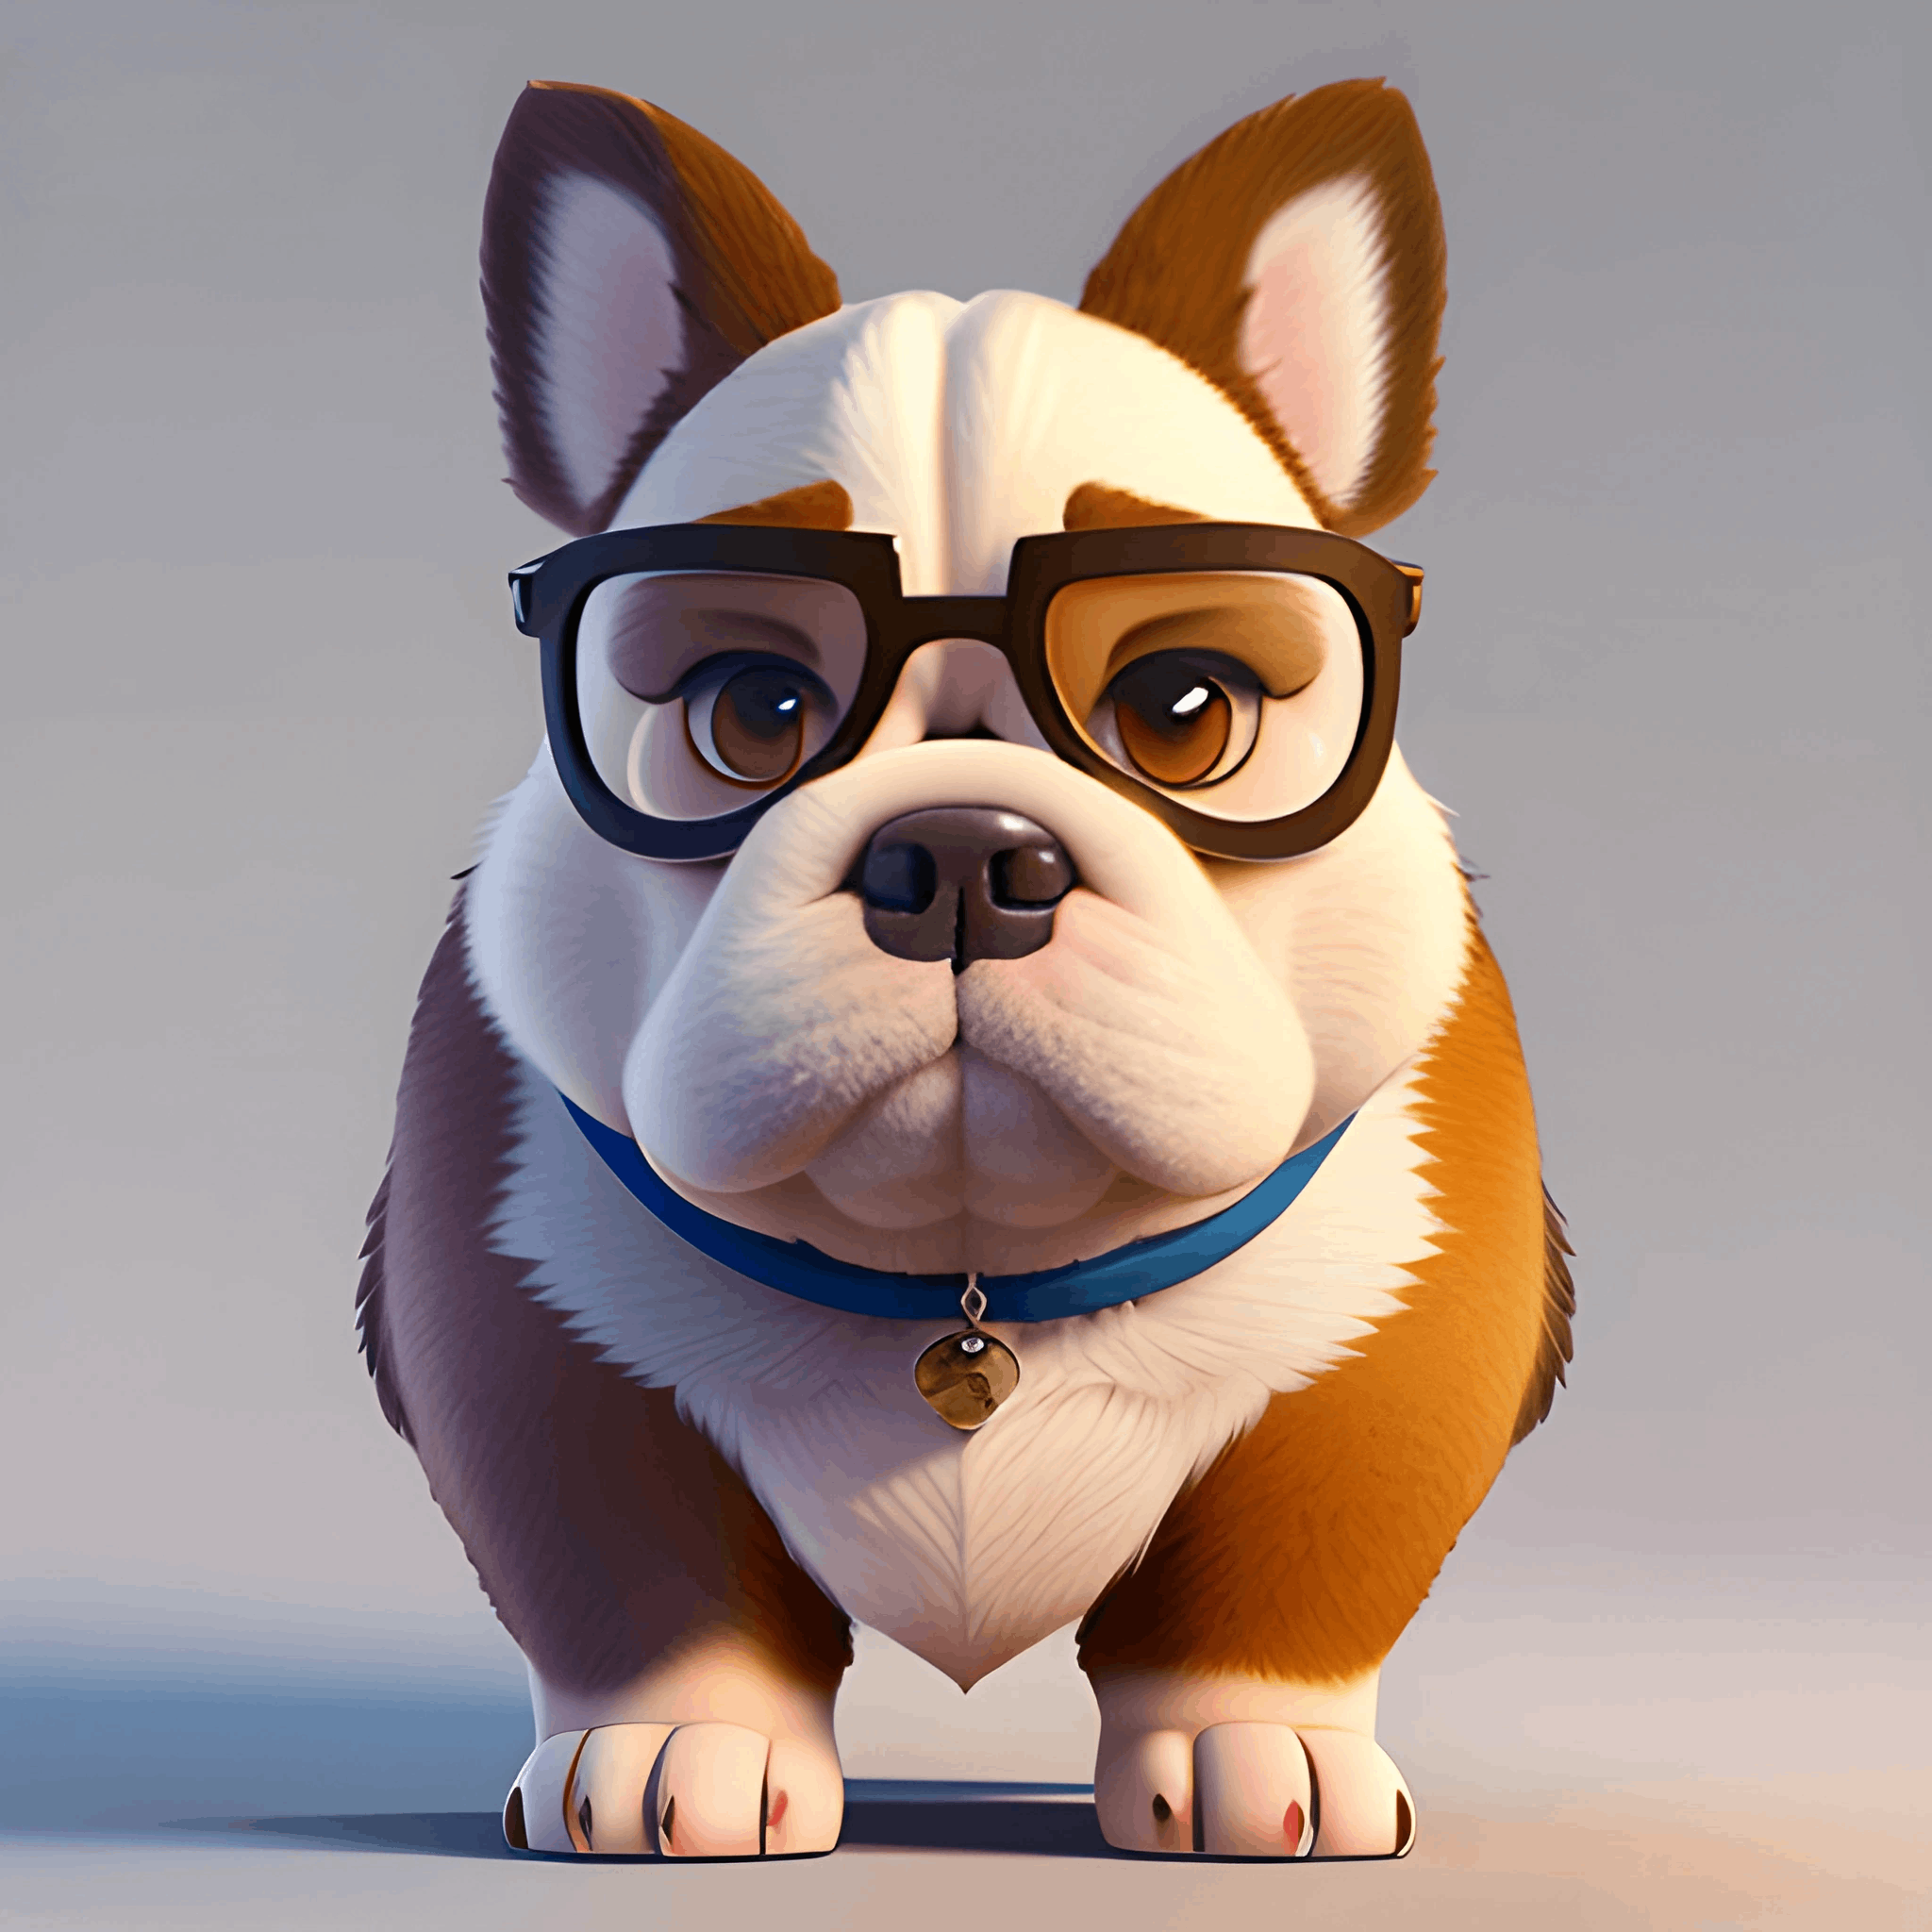 cartoon dog with glasses and a collar standing on a white surface